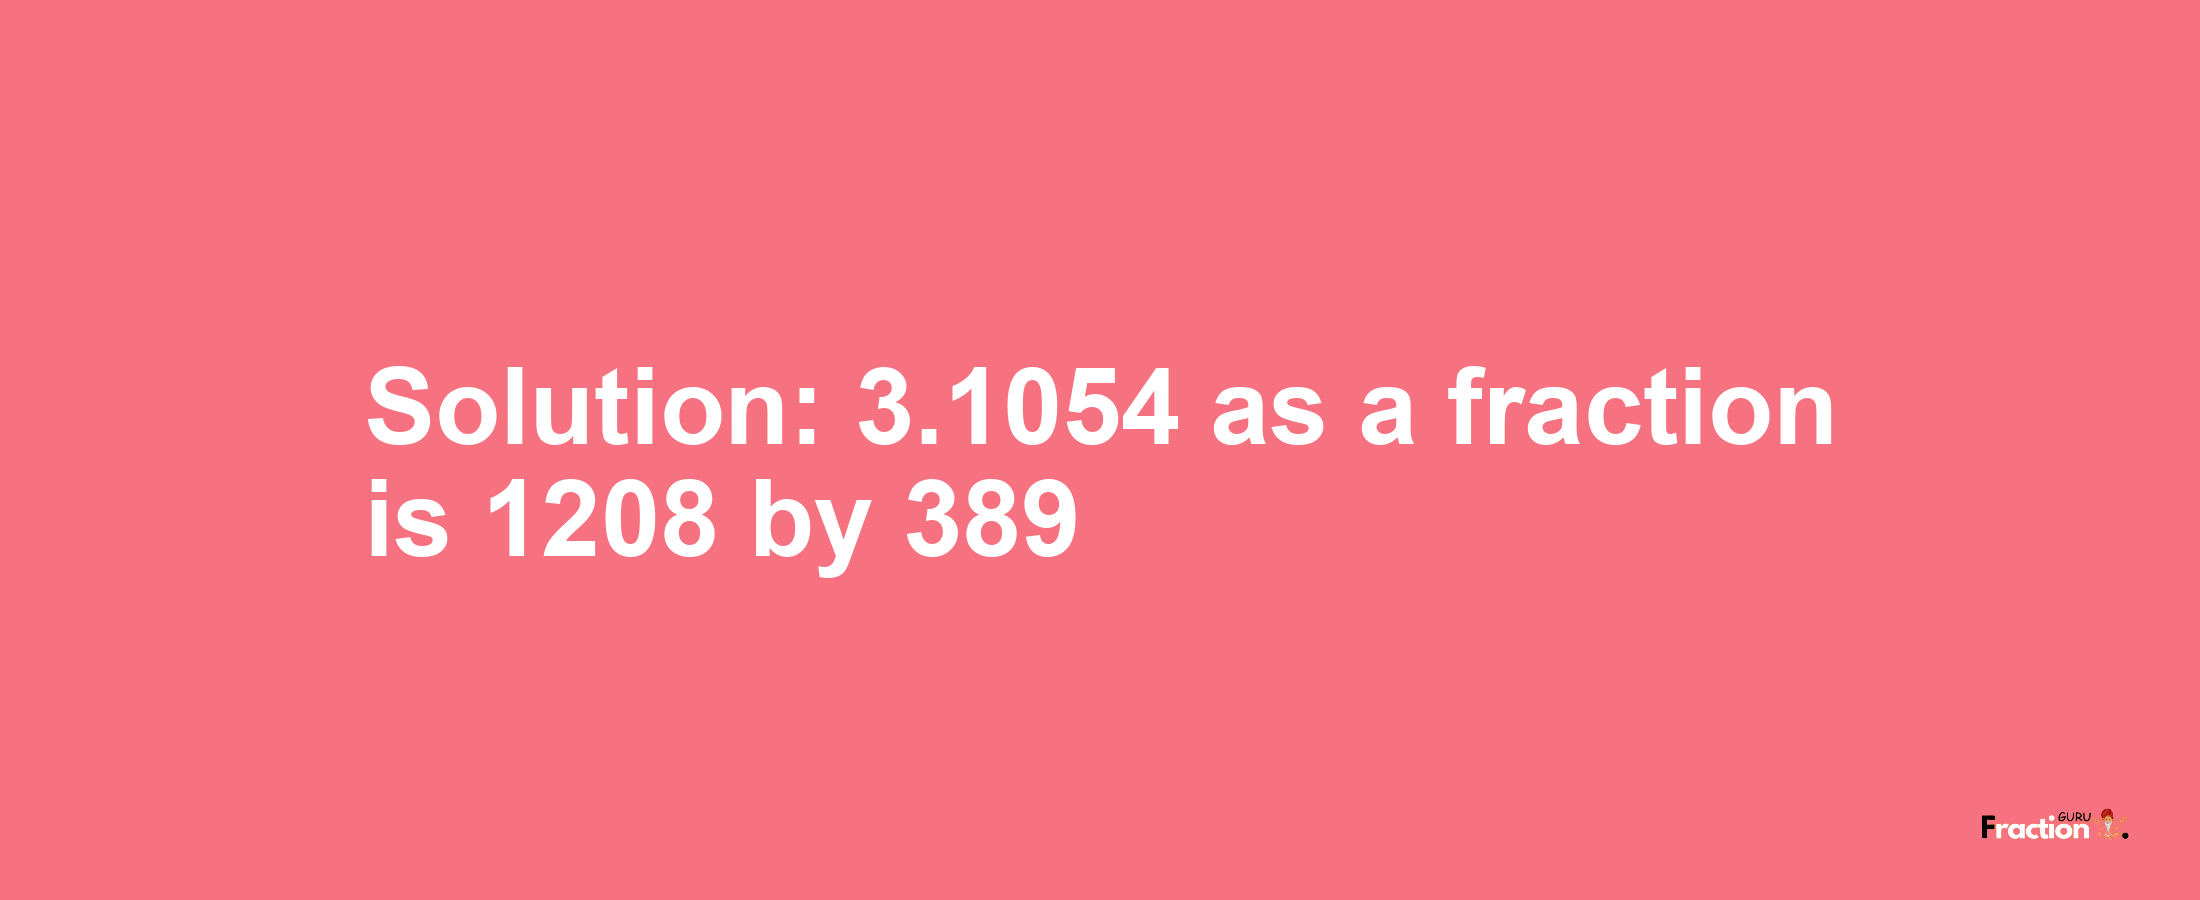 Solution:3.1054 as a fraction is 1208/389